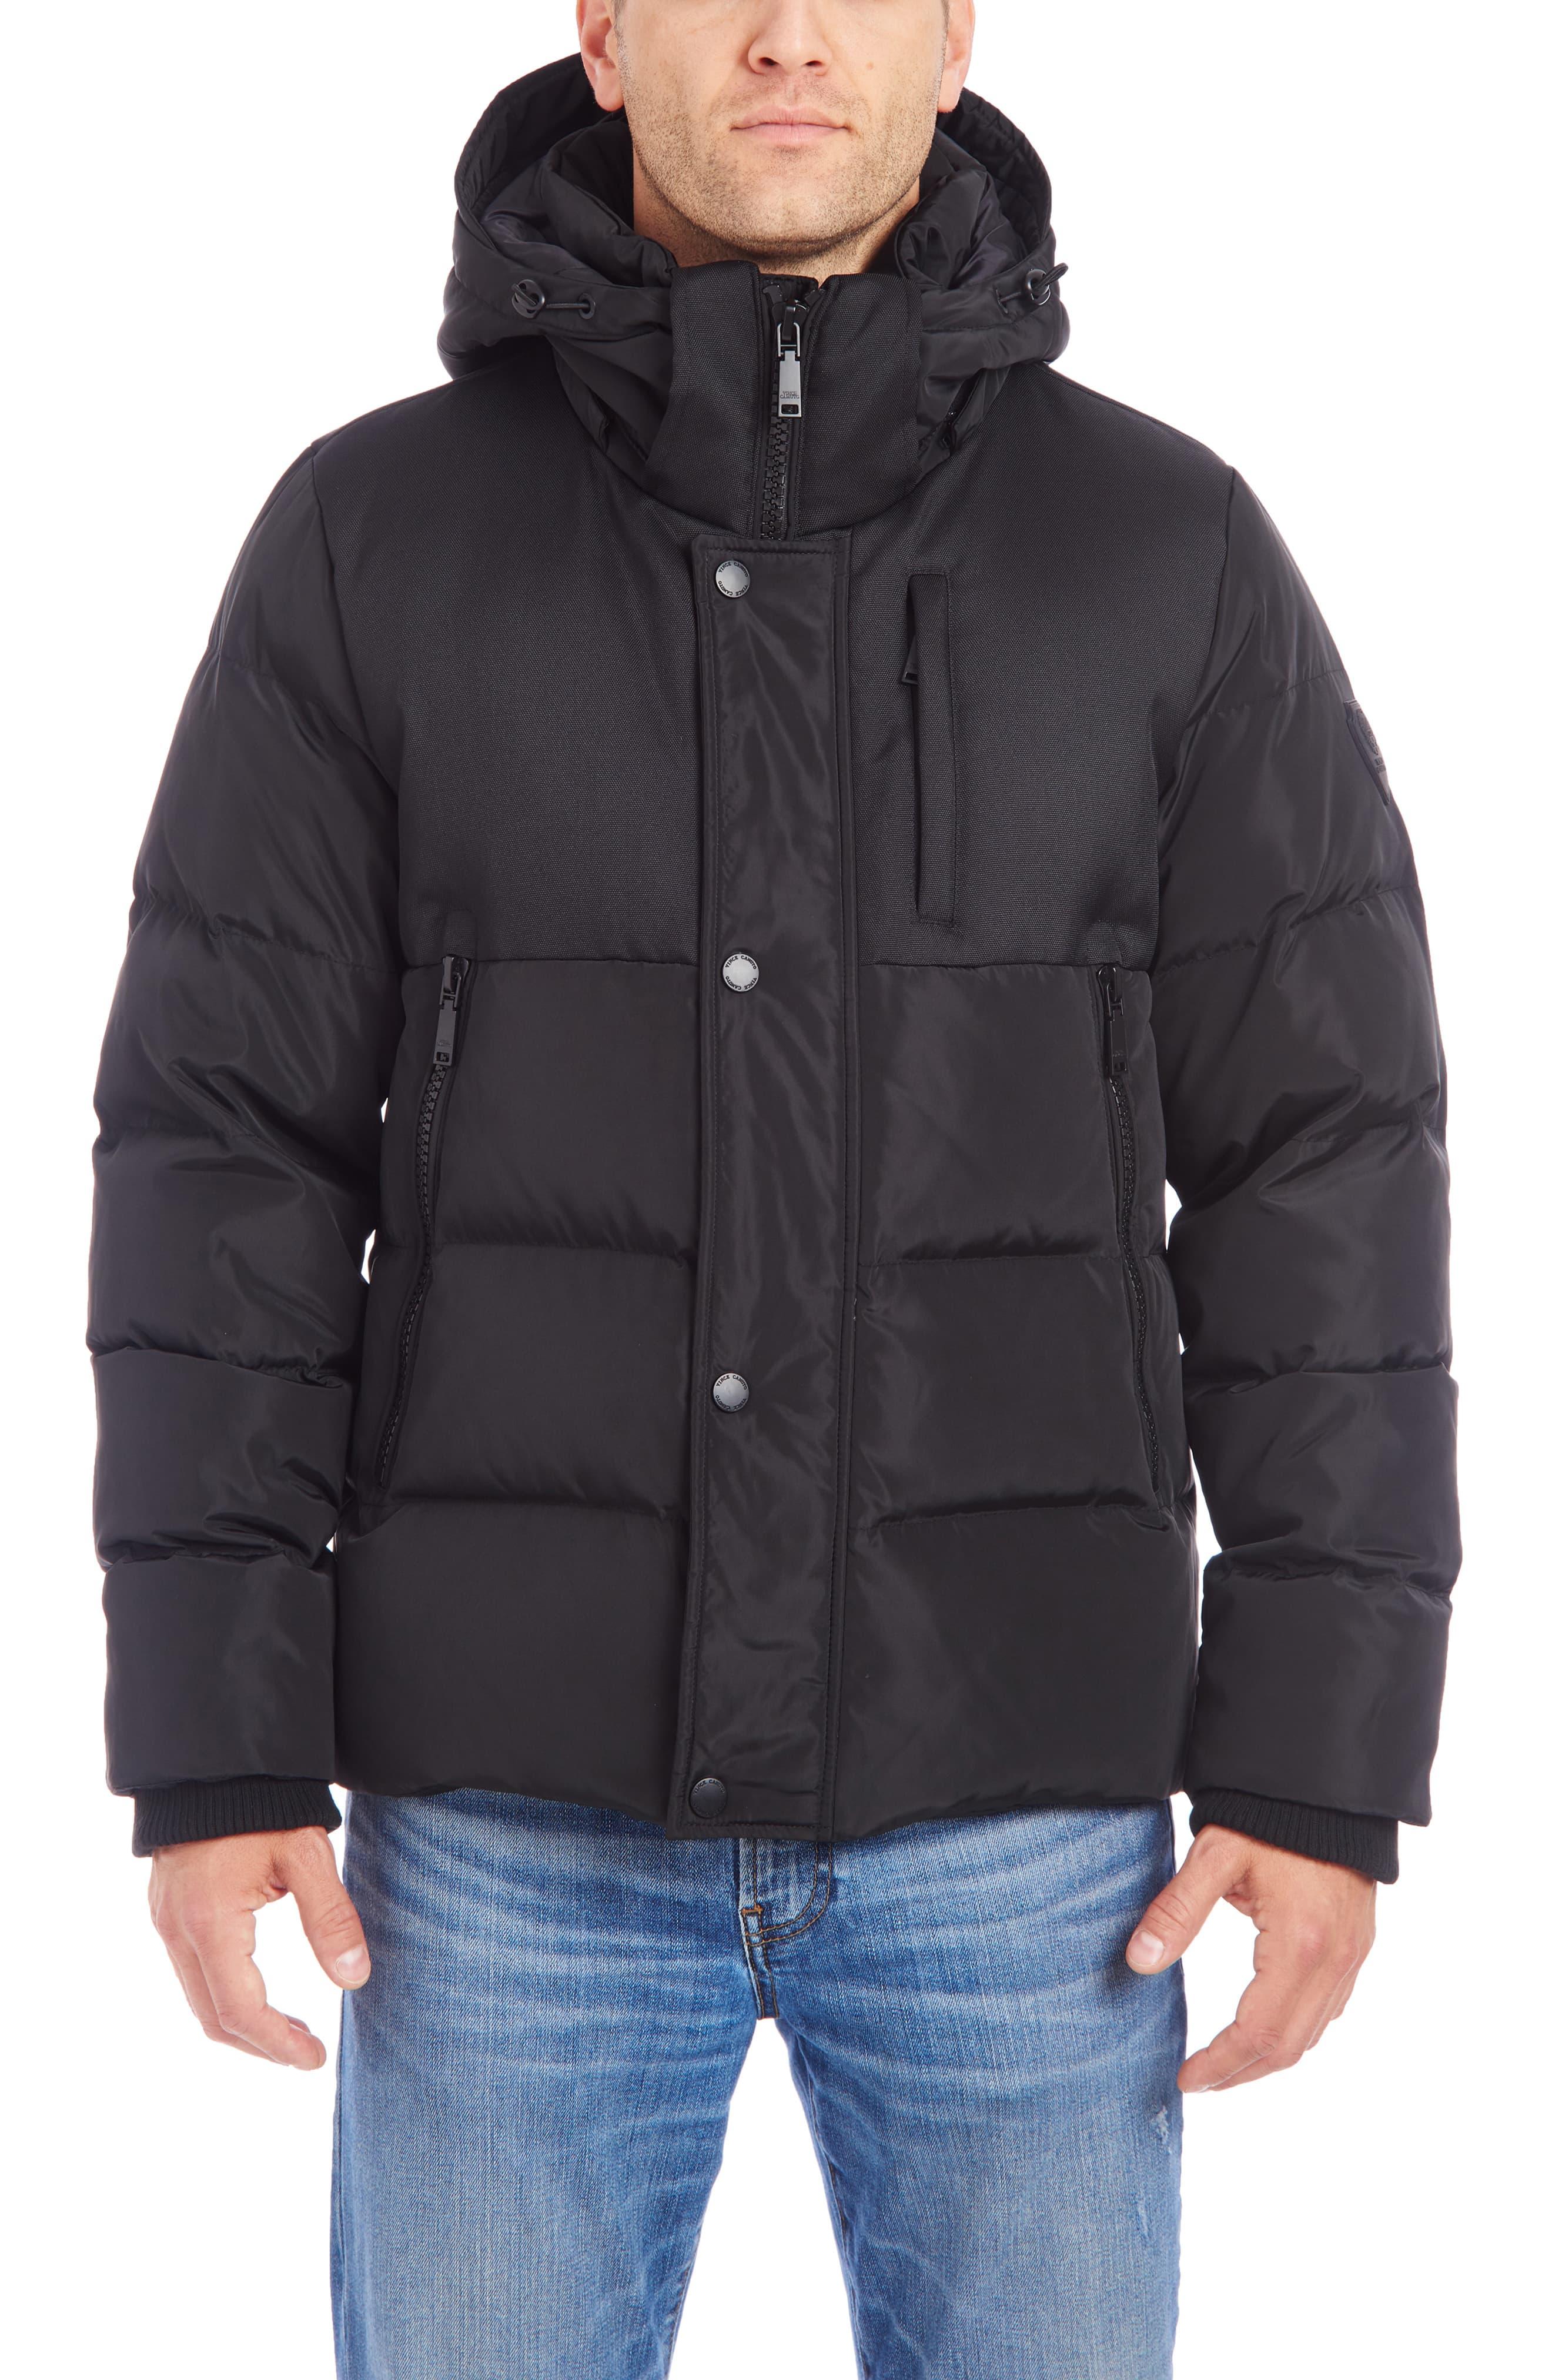 Vince Camuto Hooded Puffer Jacket in Black for Men - Lyst